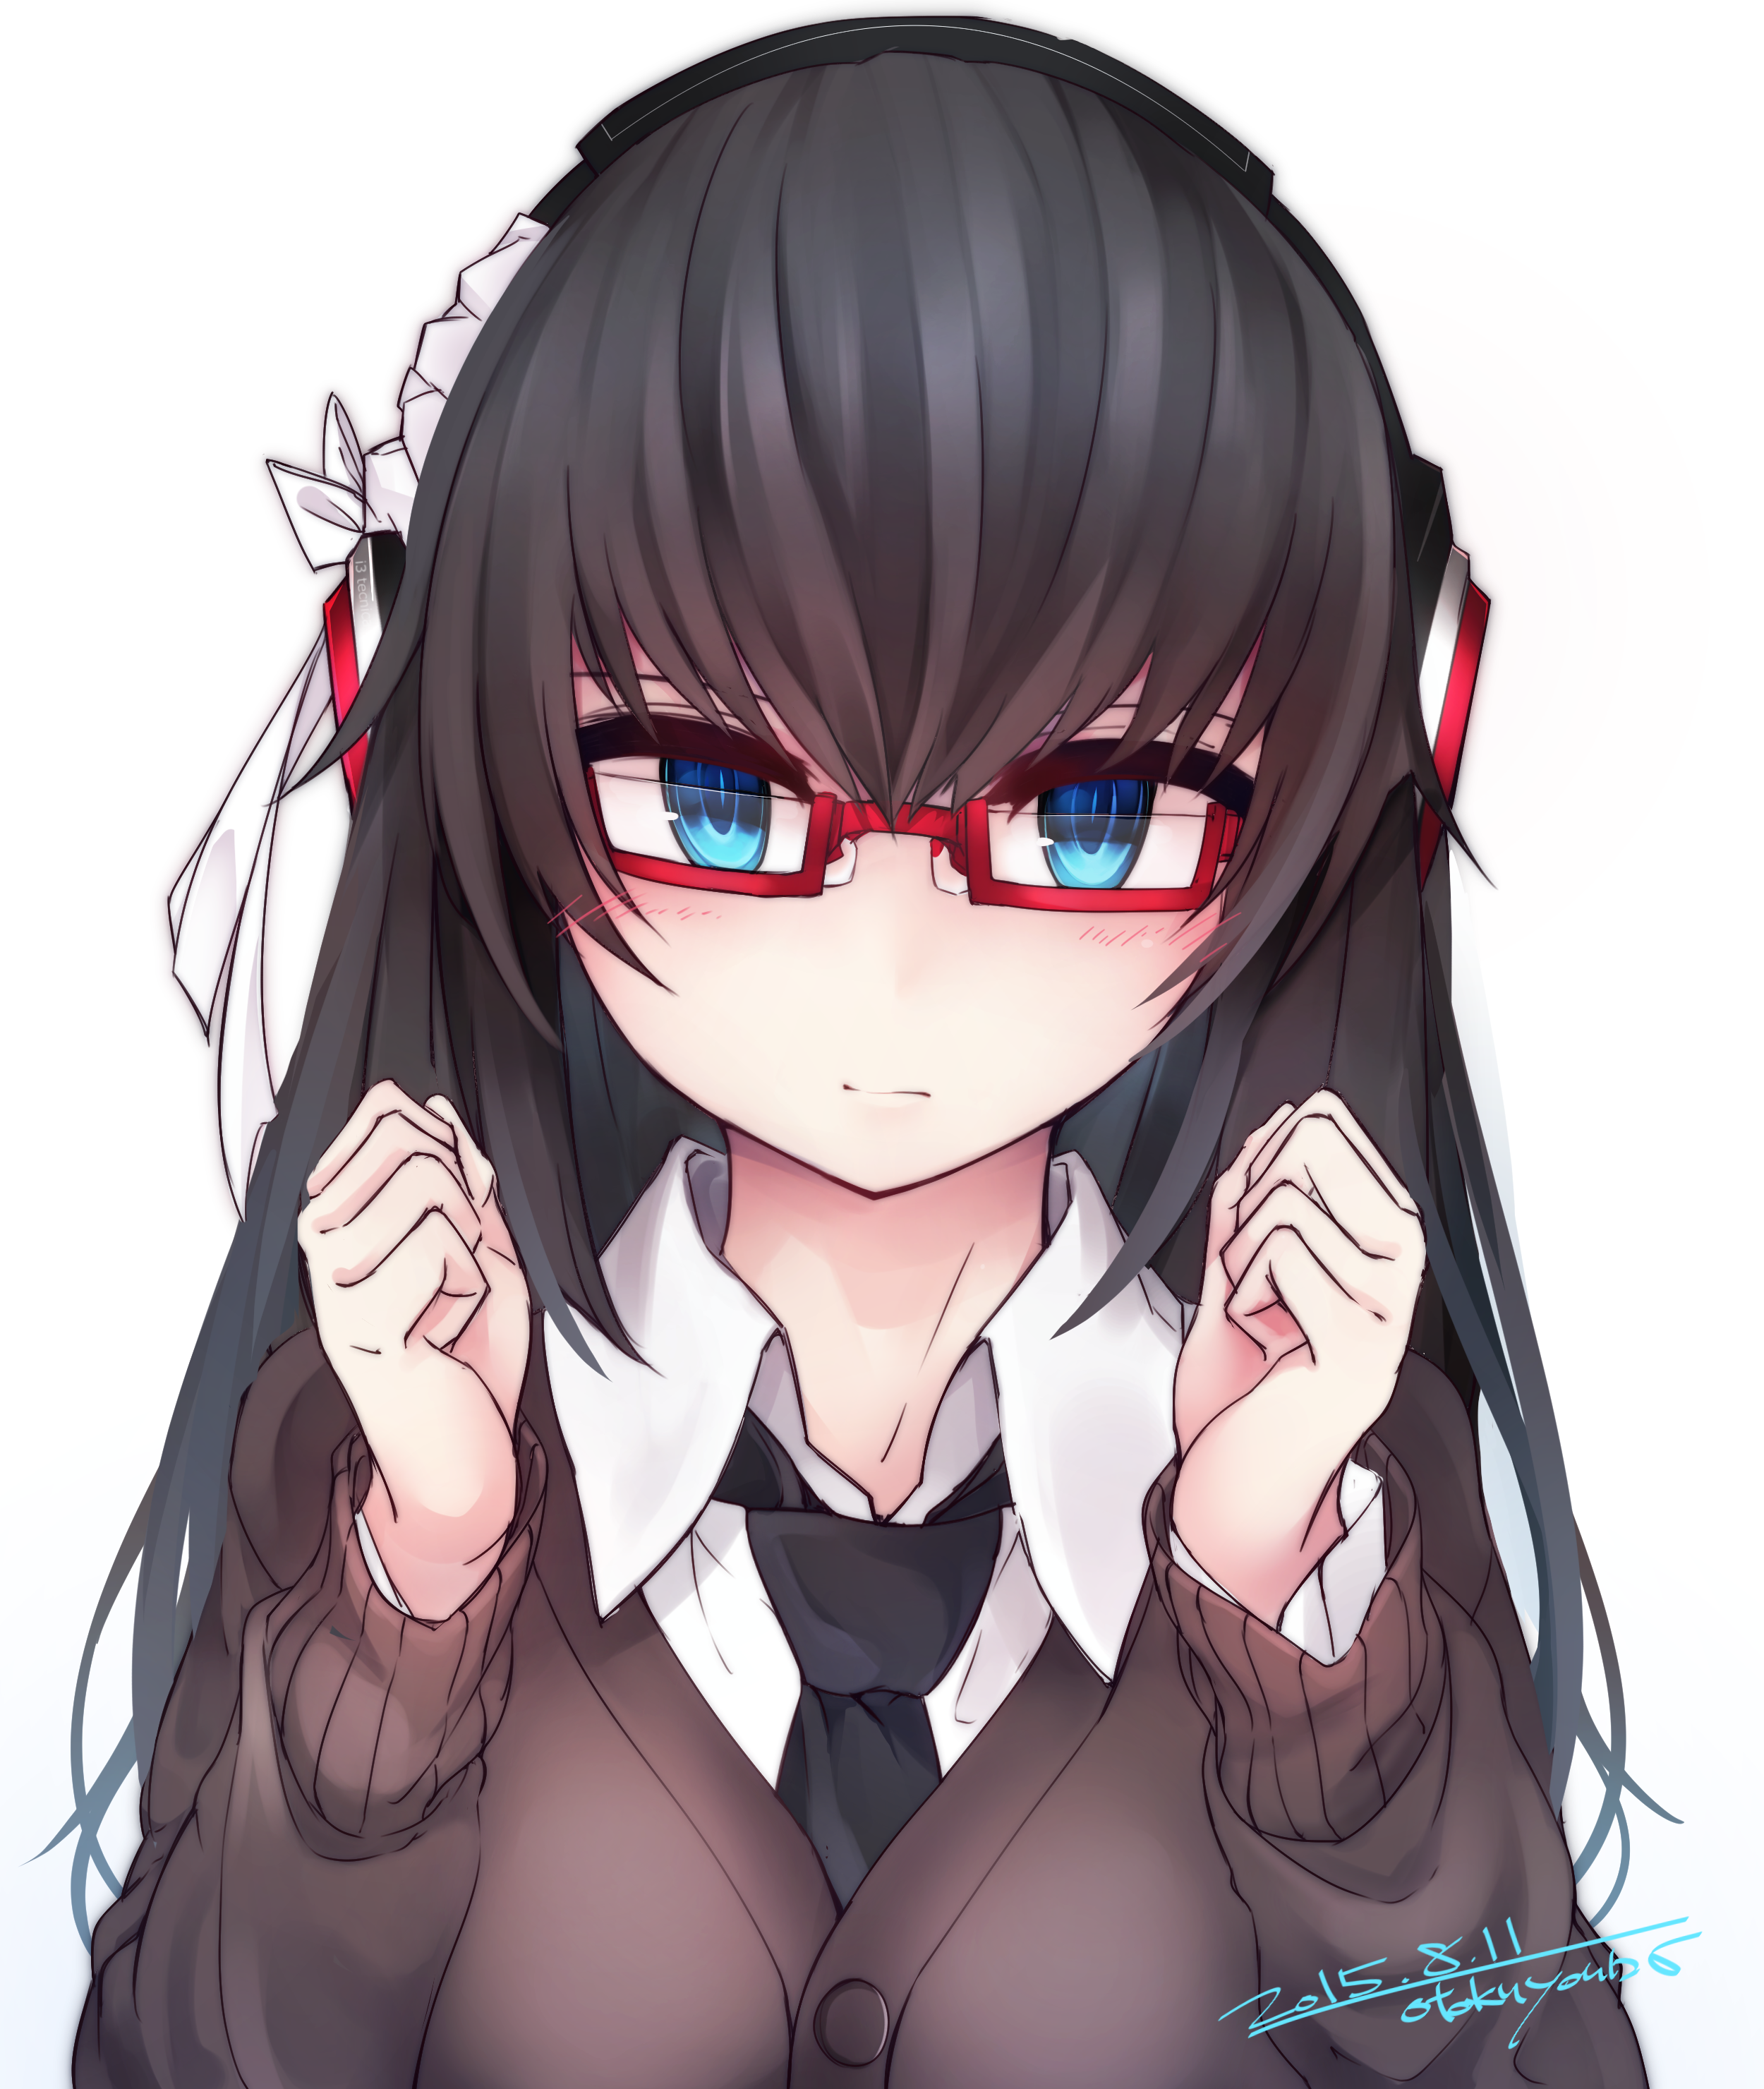 Anime 2500x2960 anime anime girls long hair glasses Pixiv blue eyes women with glasses tie brunette white background watermarked 2015 (Year) looking at viewer